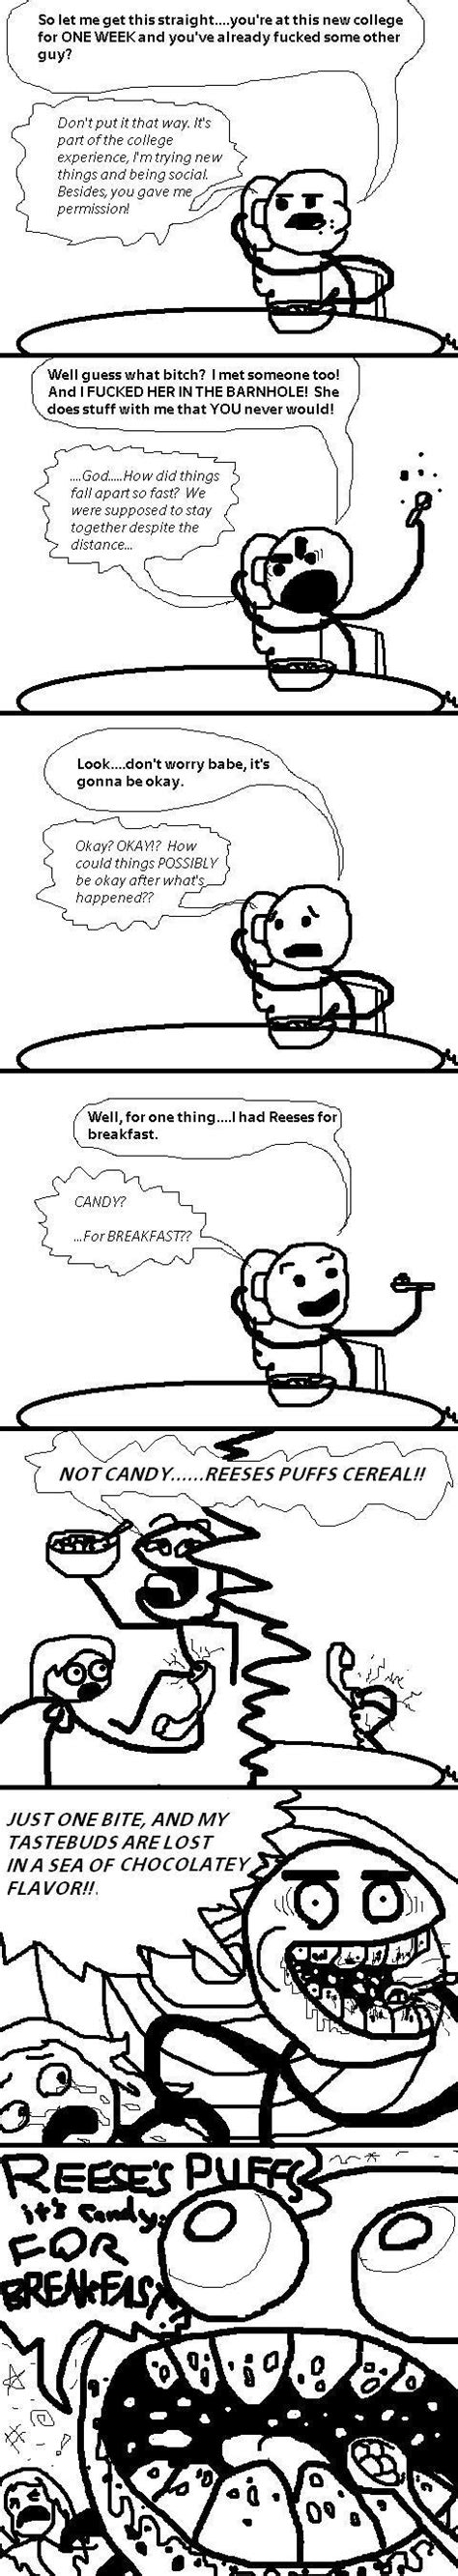 So Let Me Get This Straight Cereal Guy Rage Comics Cheating Breakfast Funny